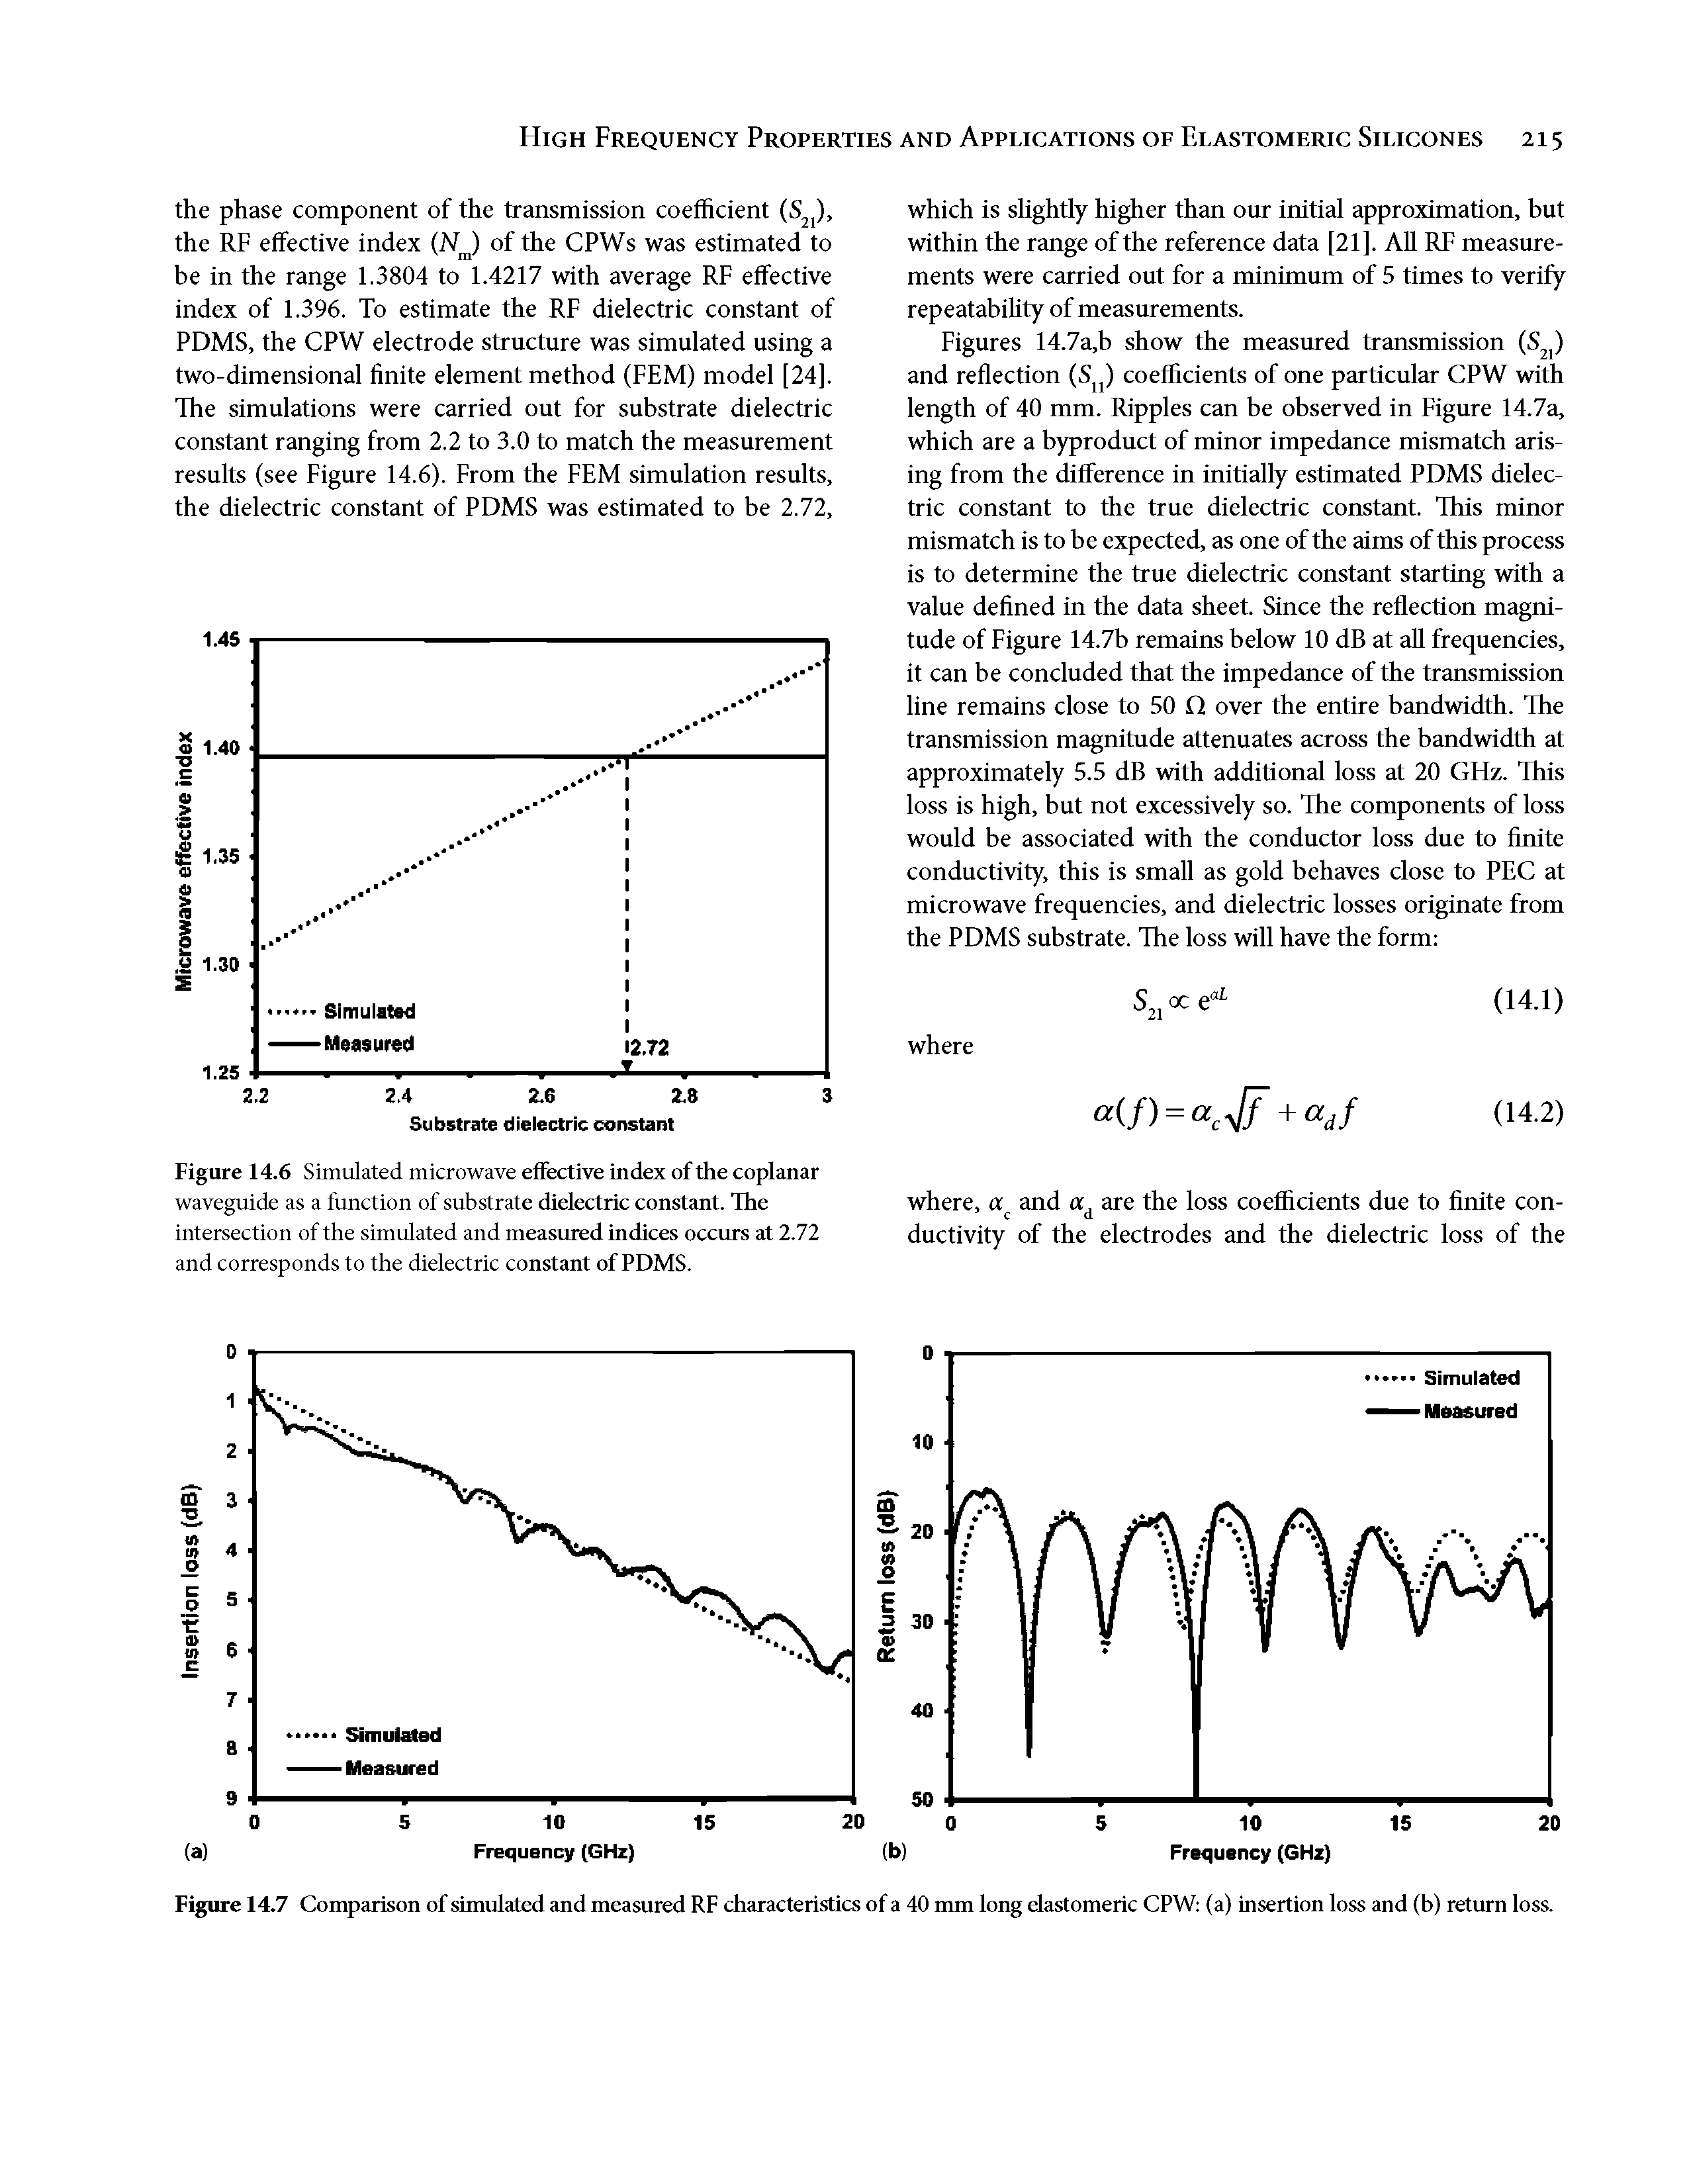 Figures 14.7a,b show the measured transmission (S j) and reflection (S ) coefficients of one particular CPW with length of 40 mm. Ripples can be observed in Figure 14.7a, which are a byproduct of minor impedance mismatch arising from the difference in initially estimated PDMS dielectric constant to the true dielectric constant. This minor mismatch is to be expected, as one of the aims of this process is to determine the true dielectric constant starting with a value defined in the data sheet. Since the reflection magnitude of Figure 14.7b remains below 10 dB at aU frequencies, it can be concluded that the impedance of the transmission line remains close to 50 O over the entire bandwidth. The transmission magnitude attenuates across the bandwidth at approximately 5.5 dB with additional loss at 20 GHz. This loss is high, but not excessively so. The components of loss would be associated with the conductor loss due to finite conductivity, this is small as gold behaves close to PEC at microwave frequencies, and dielectric losses originate from the PDMS substrate. The loss will have the form ...